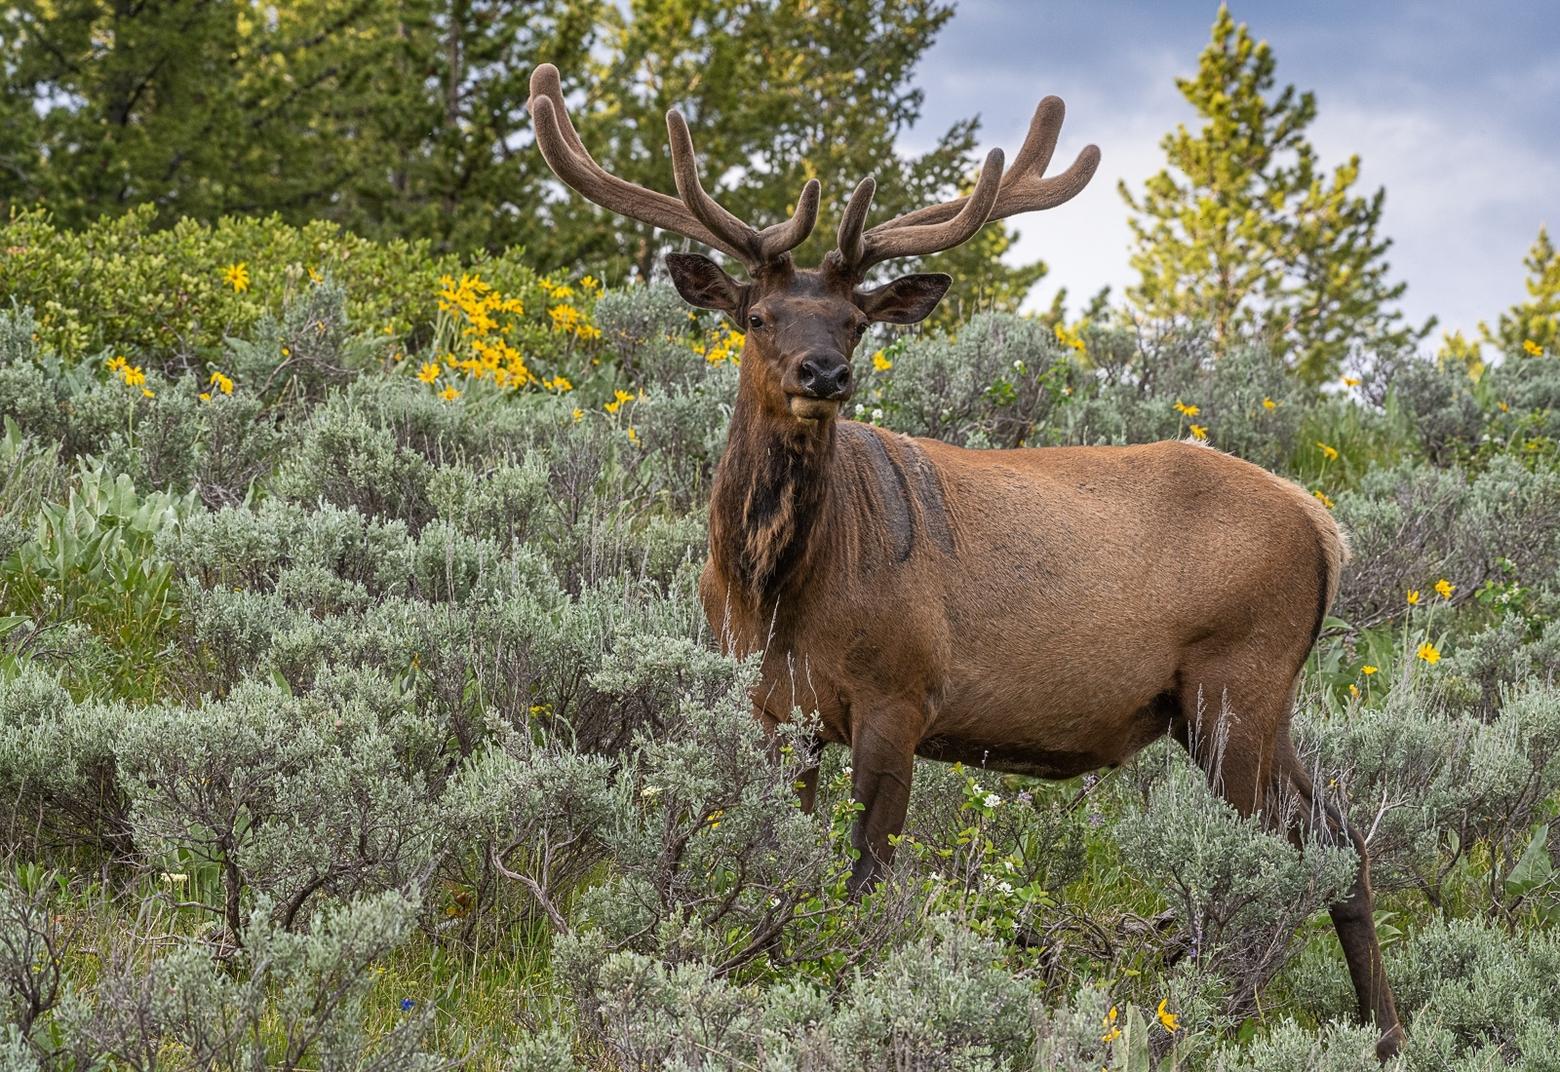 Bull elk in velvet, Grand Teton National Park. It was a rare privilege to photograph this elk for over an hour. Moving slowly and maintaining a safe distance is less of a disturbance to wildlife. Photo by Howie Garber